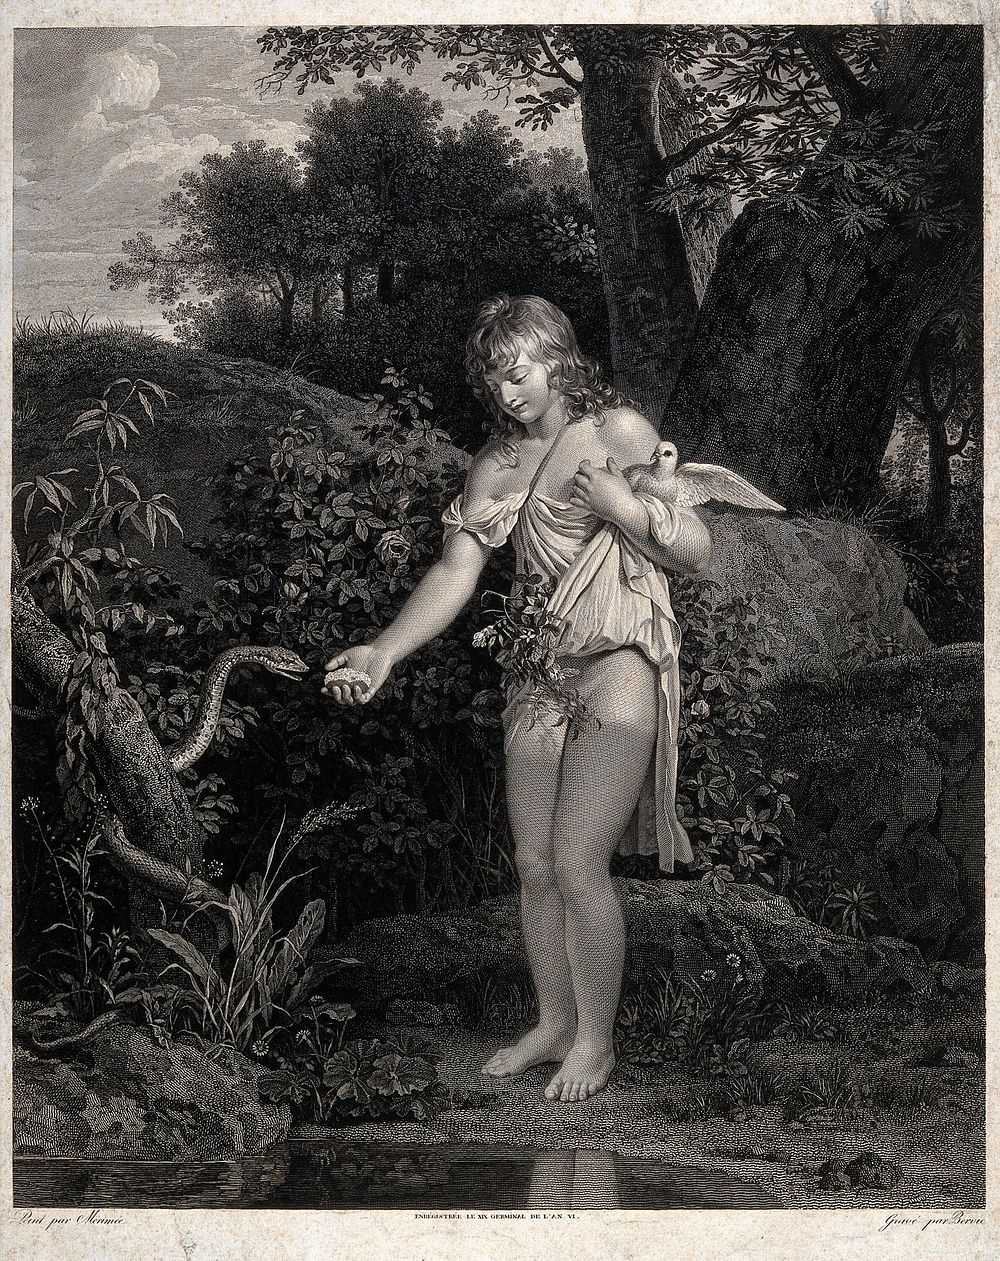 A half-naked youth offers food to a snake coiled round a tree trunk. Engraving by C.-C. Bervic after J.-F.-L. Mérimée, 1798.